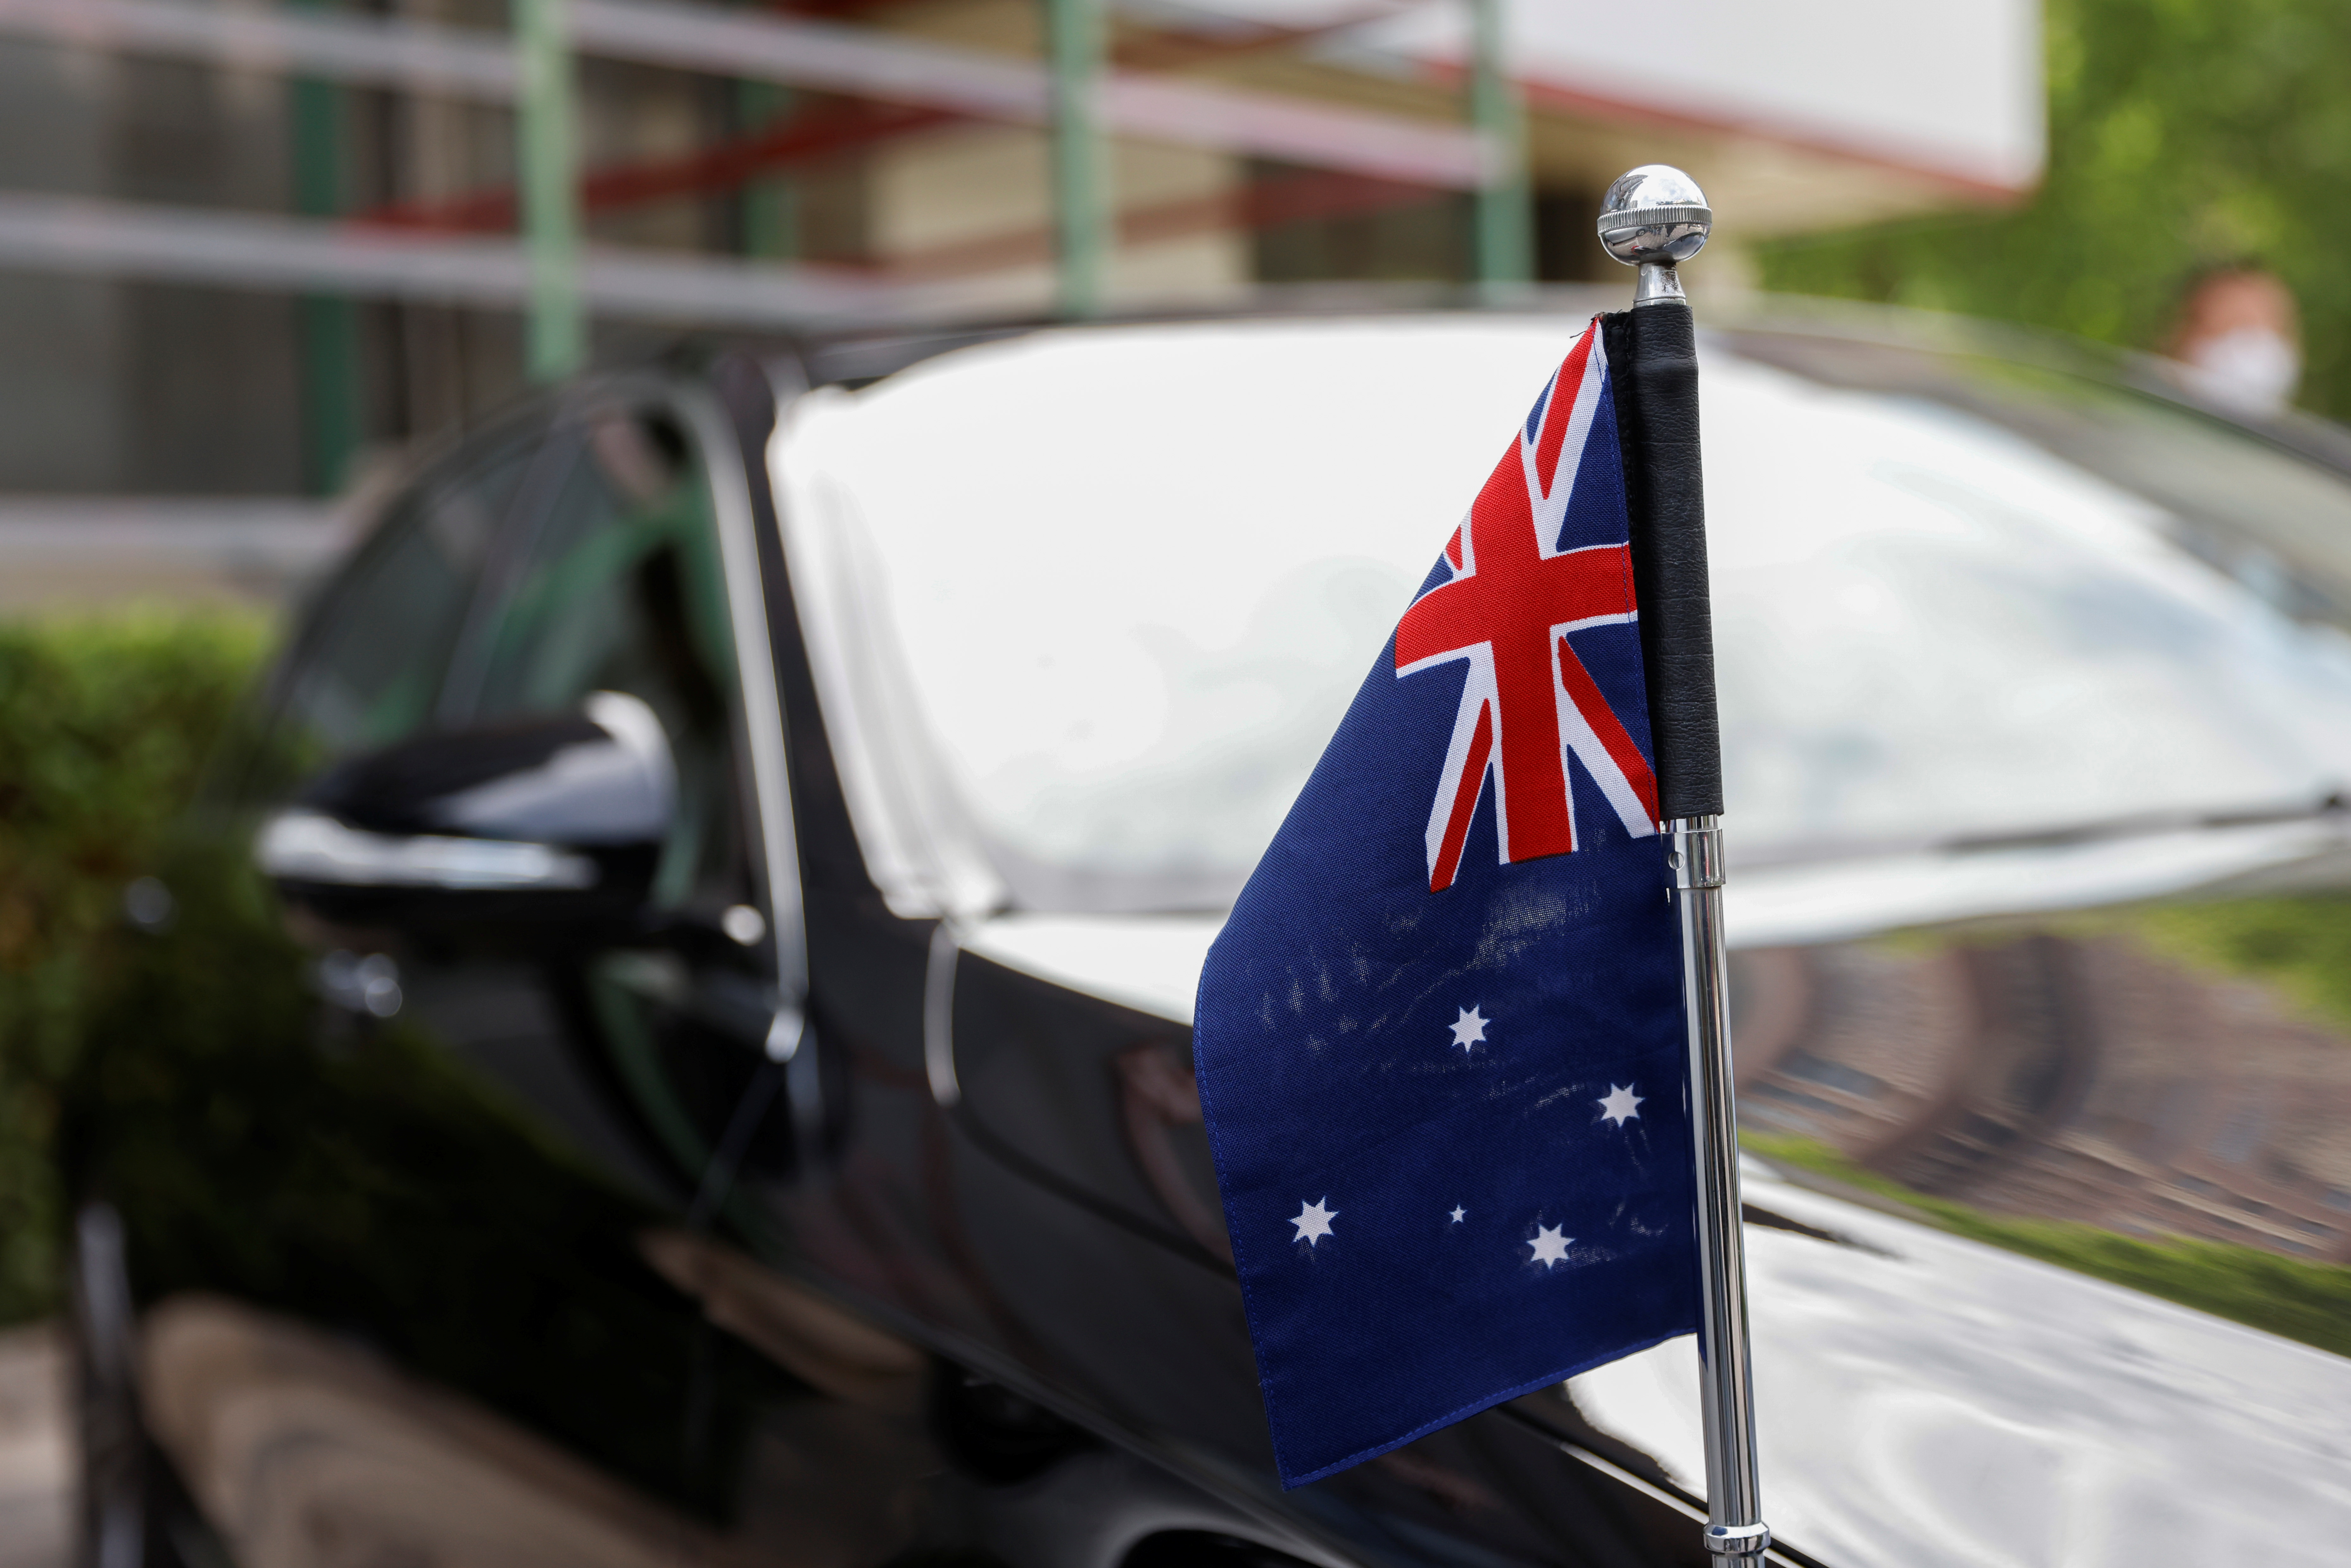 An Australian flag is seen on the car of Australia's Ambassador to China, Graham Fletcher, after he was not granted access to the Beijing No. 2 Intermediate People's Court, in Beijing